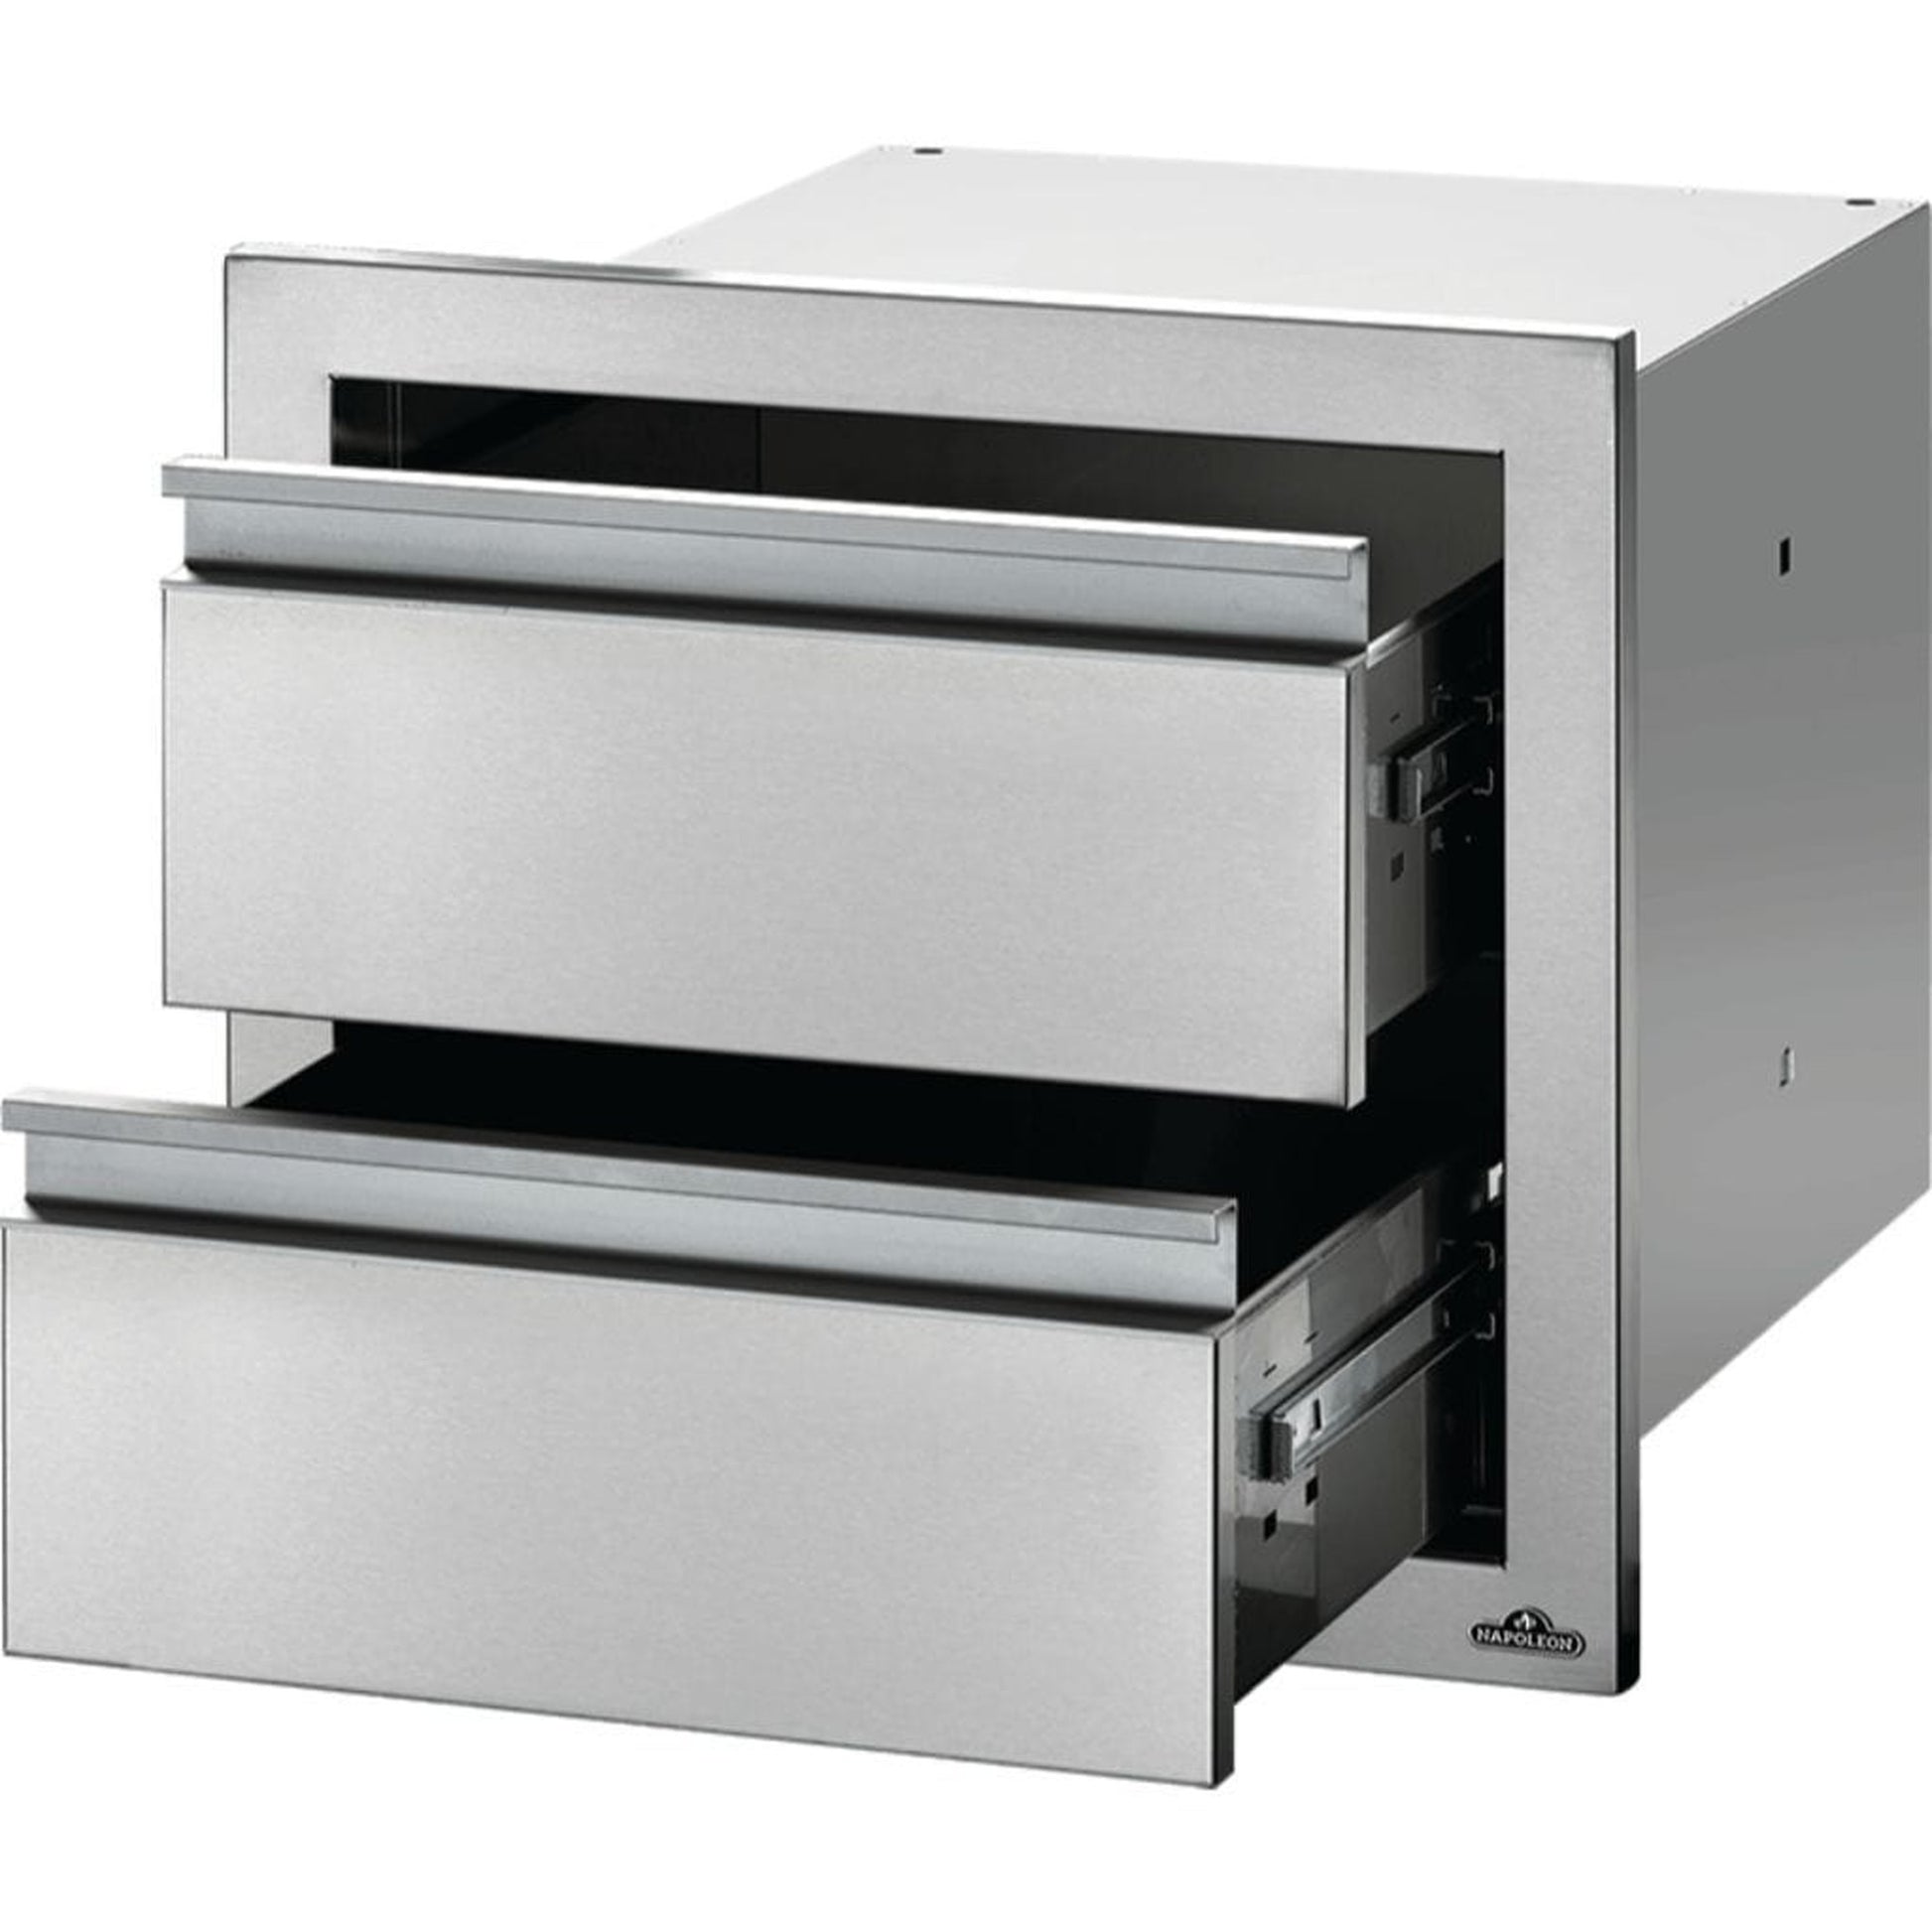 Napoleon 18" Stainless Steel Triple/Double/Single Drawer